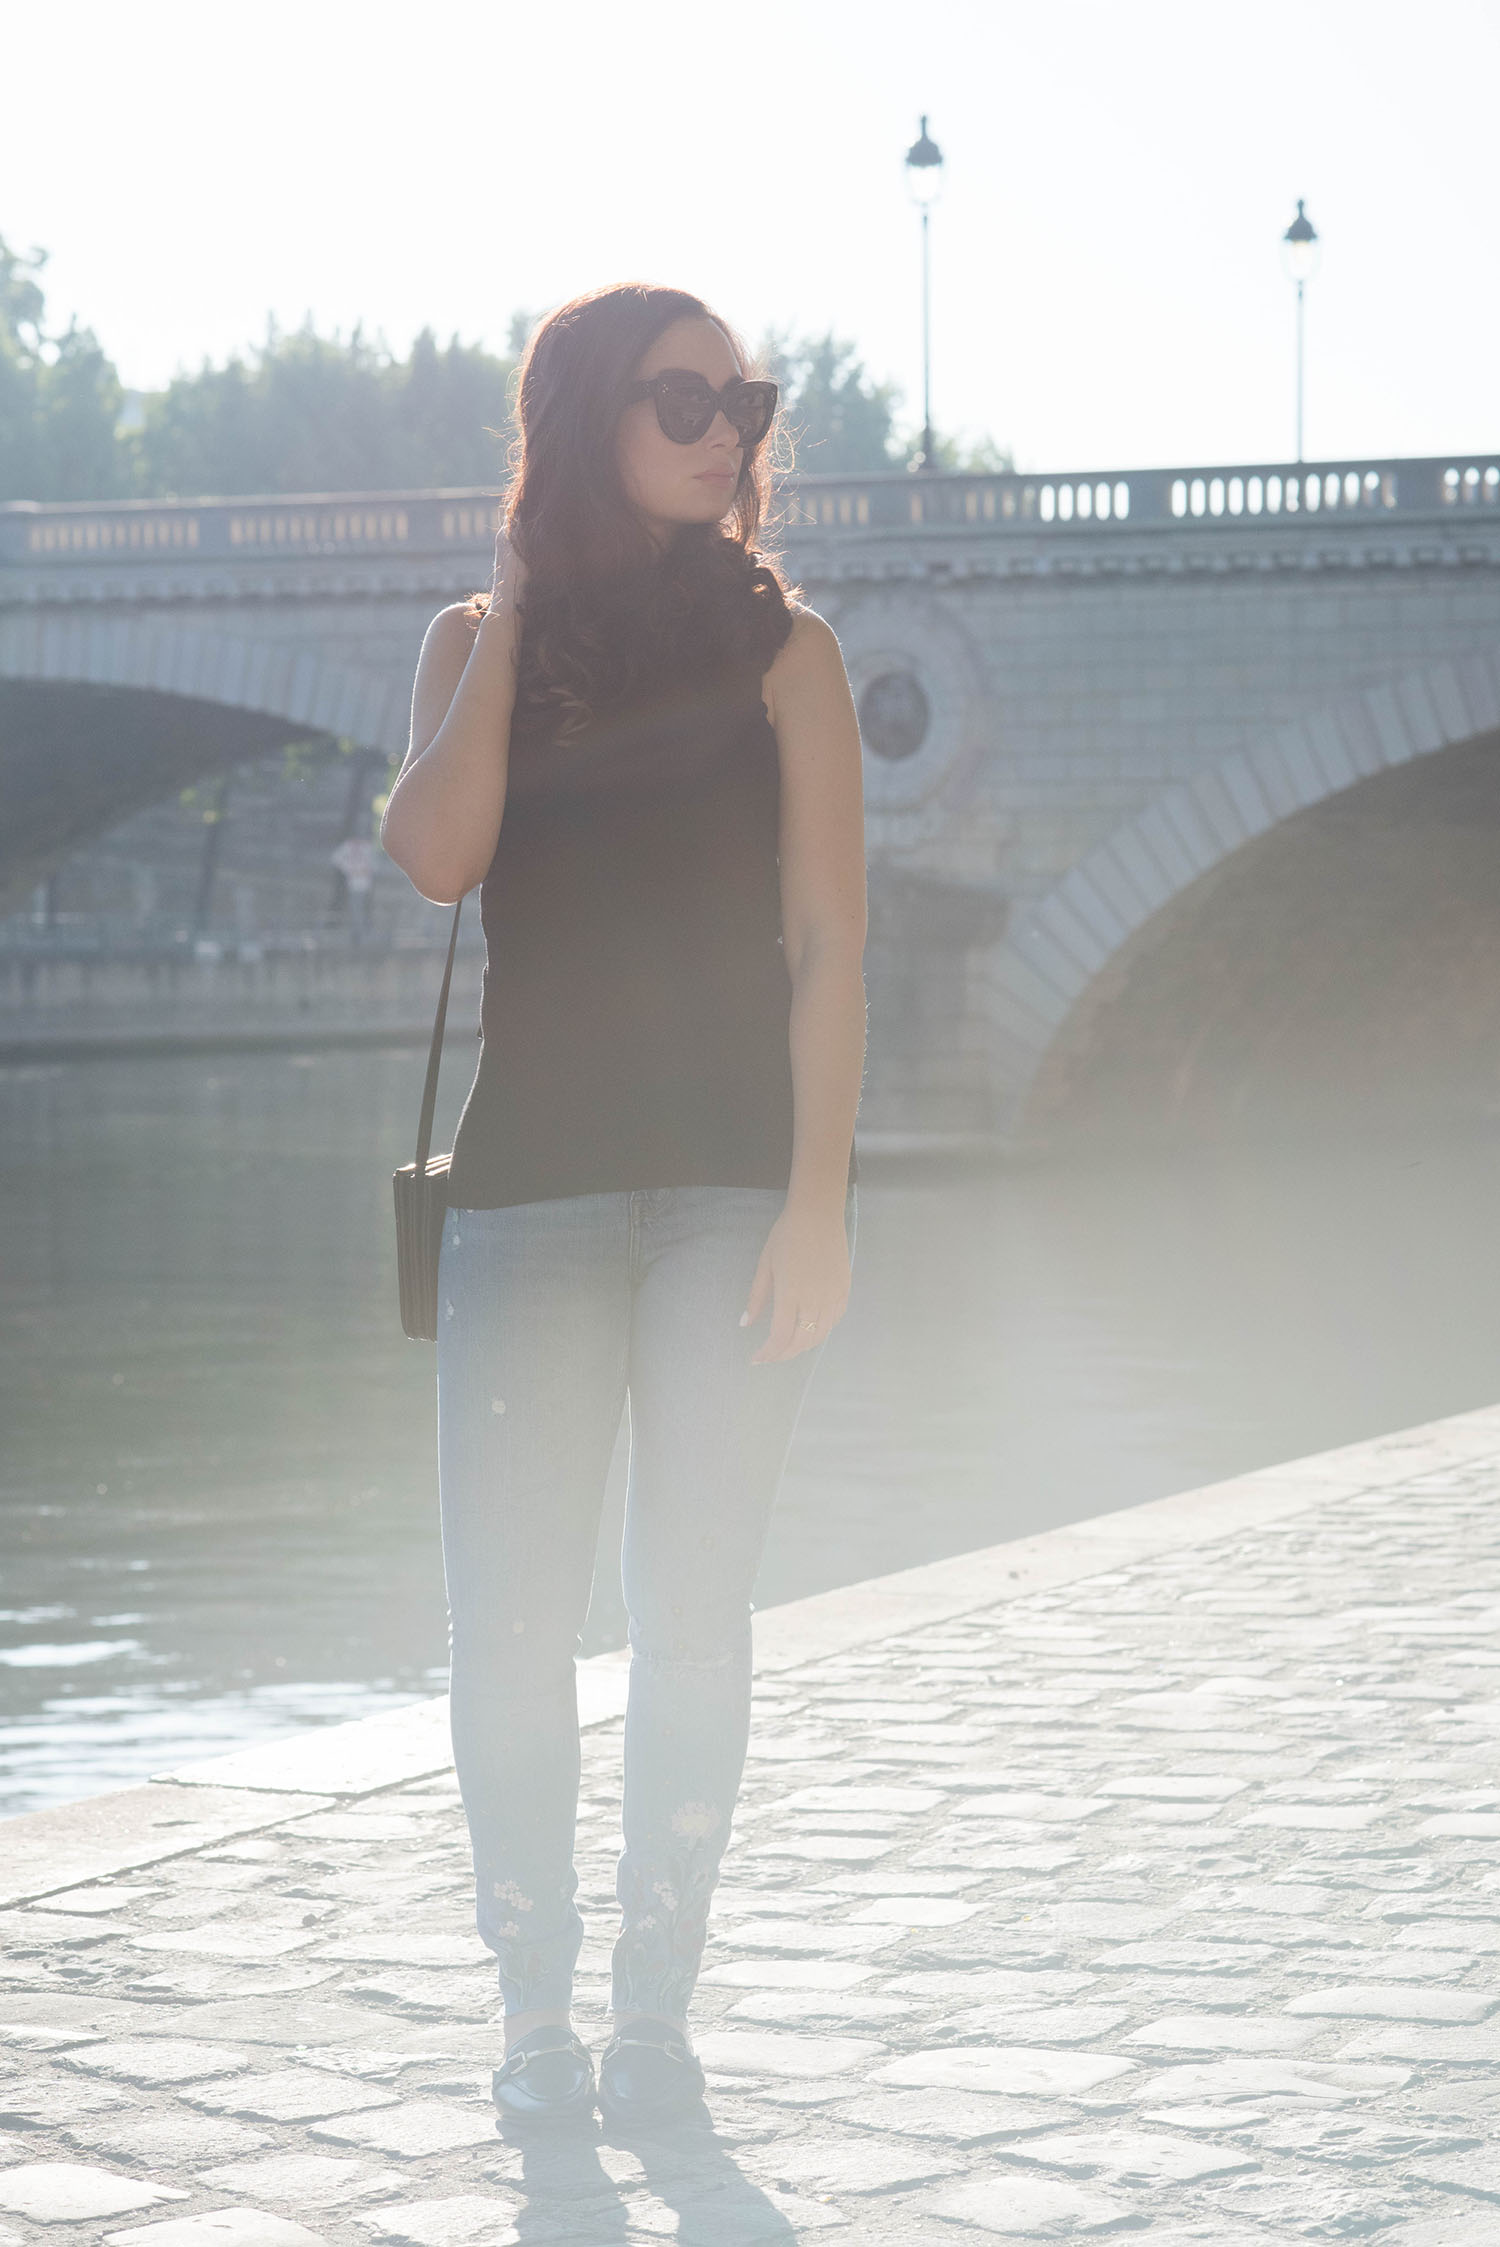 Fashion blogger Cee Fardoe of Coco & Vera stands on Ile Saint-Louis in Paris wearing Zara embroidered jeans, Celine sunglasses and a Le Chateau top